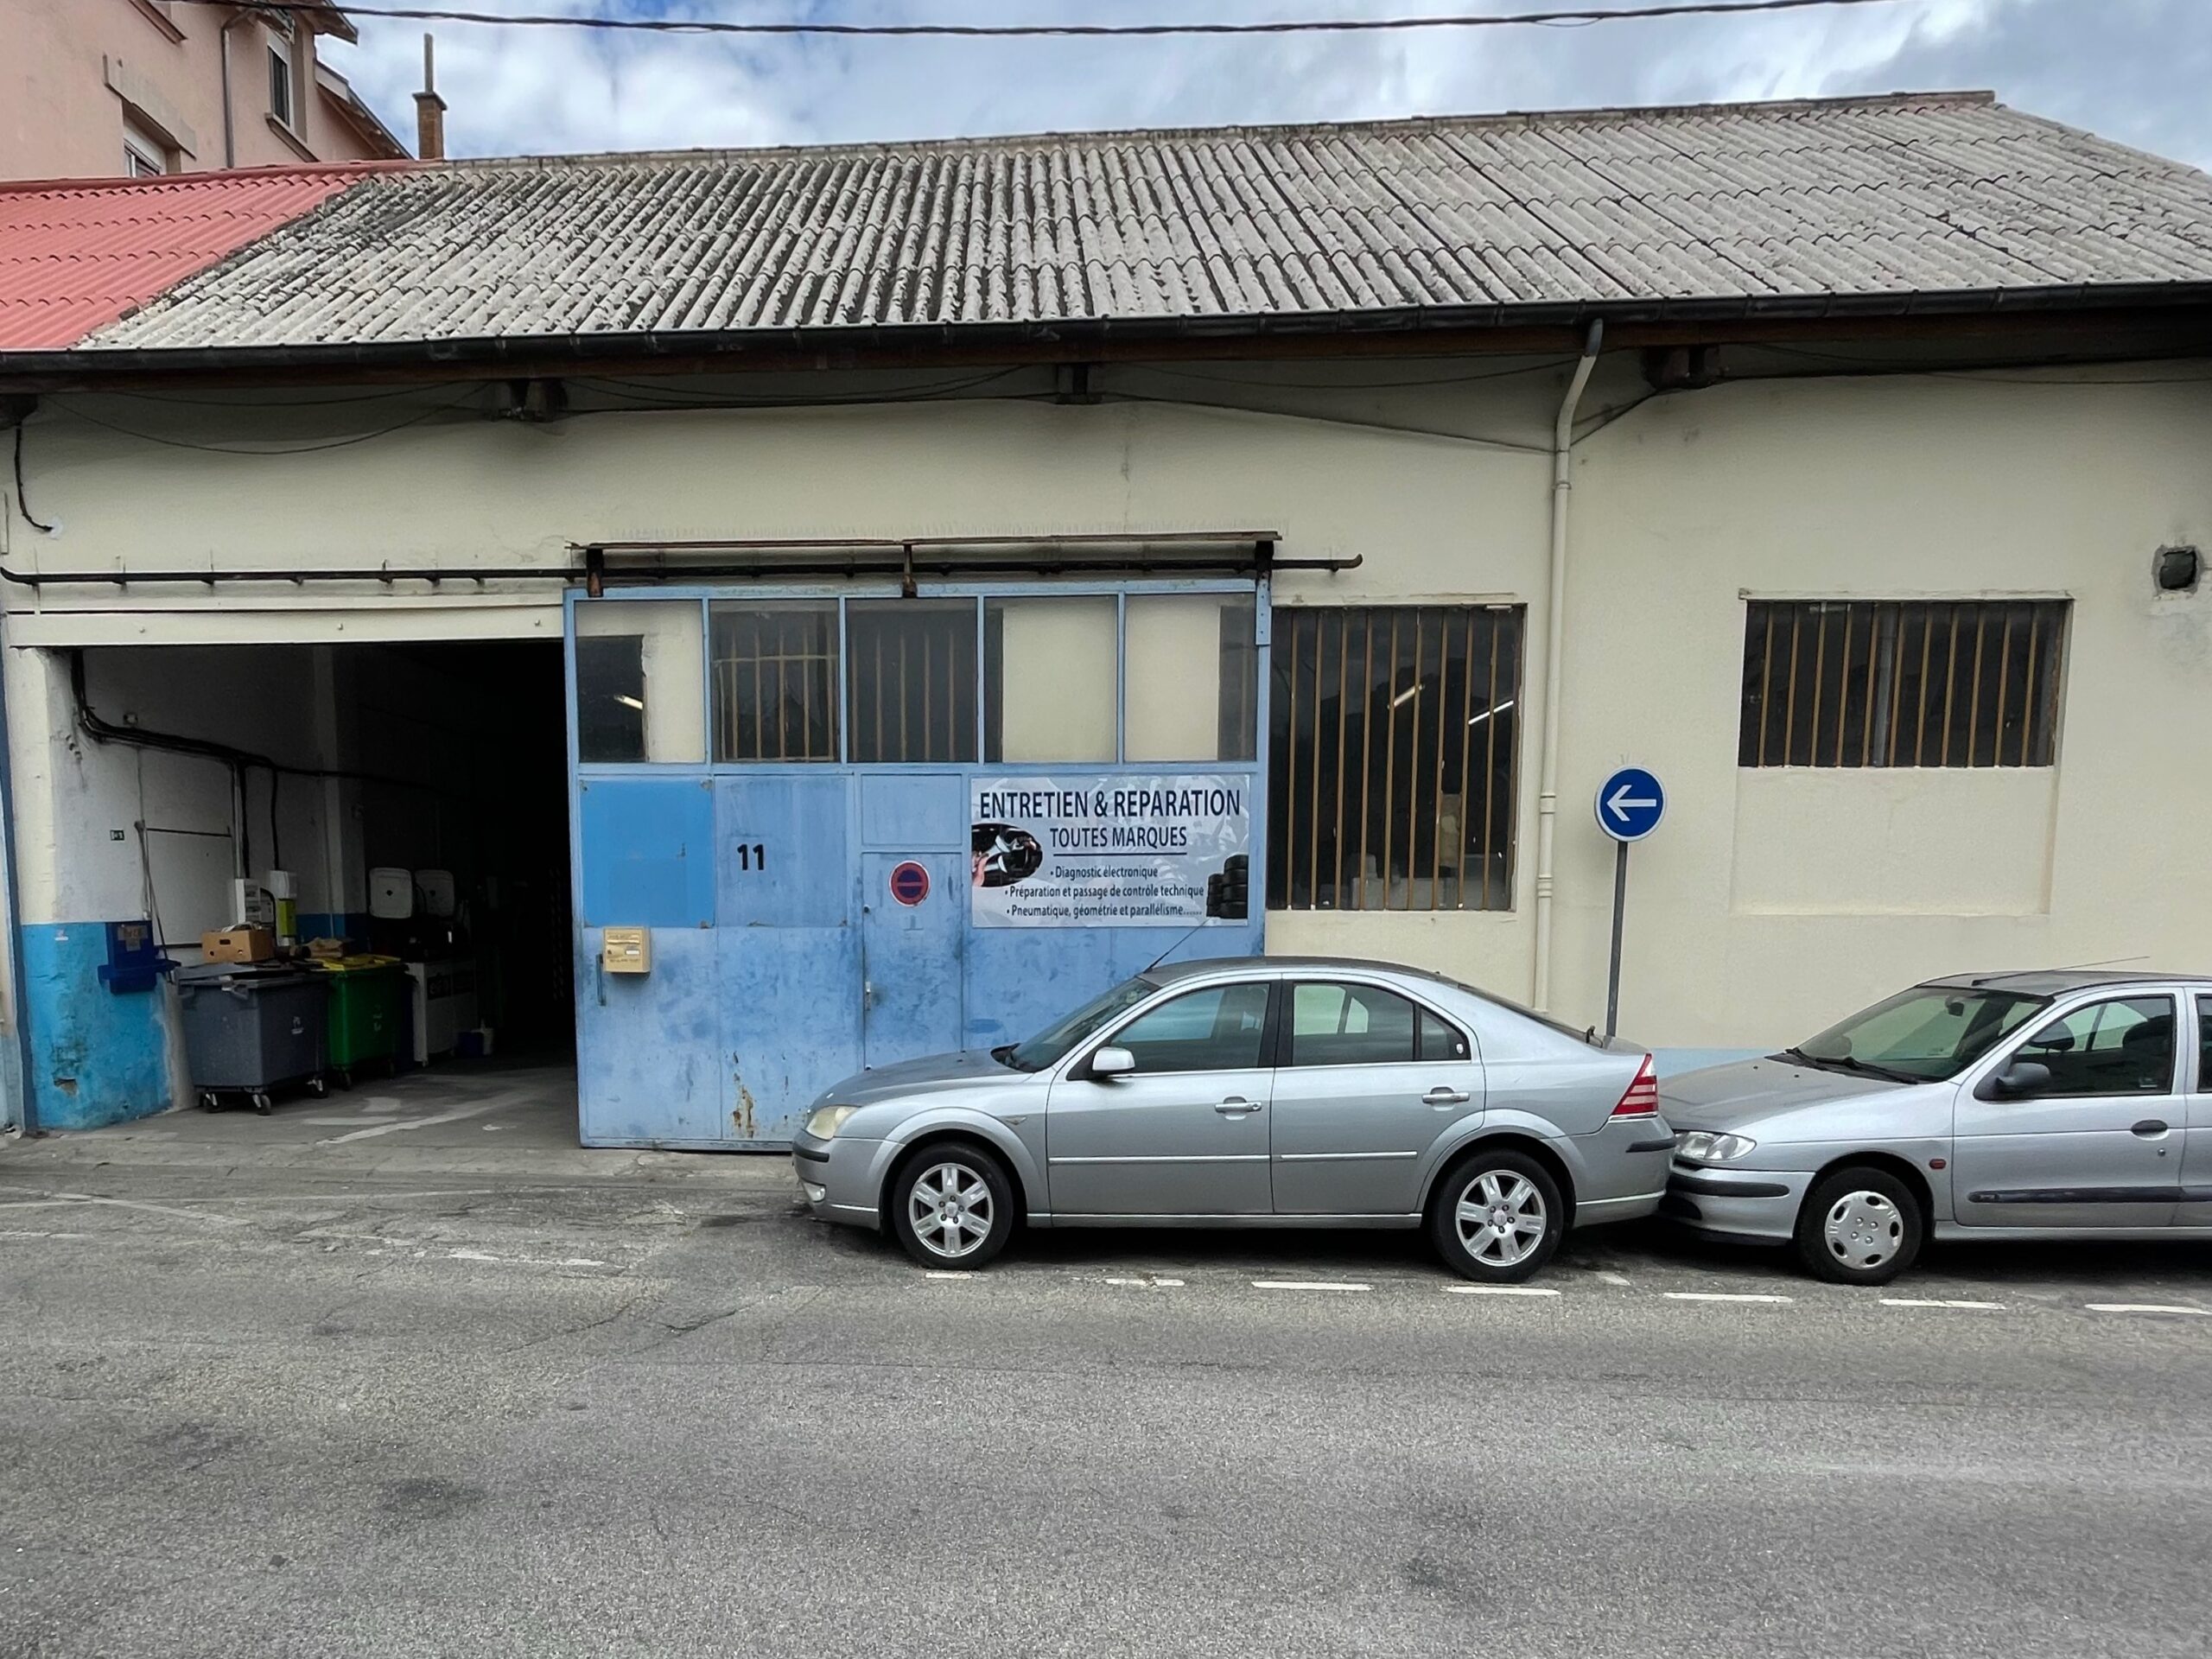 You are currently viewing <h1>Vente d’un garage à Grenoble</h1>